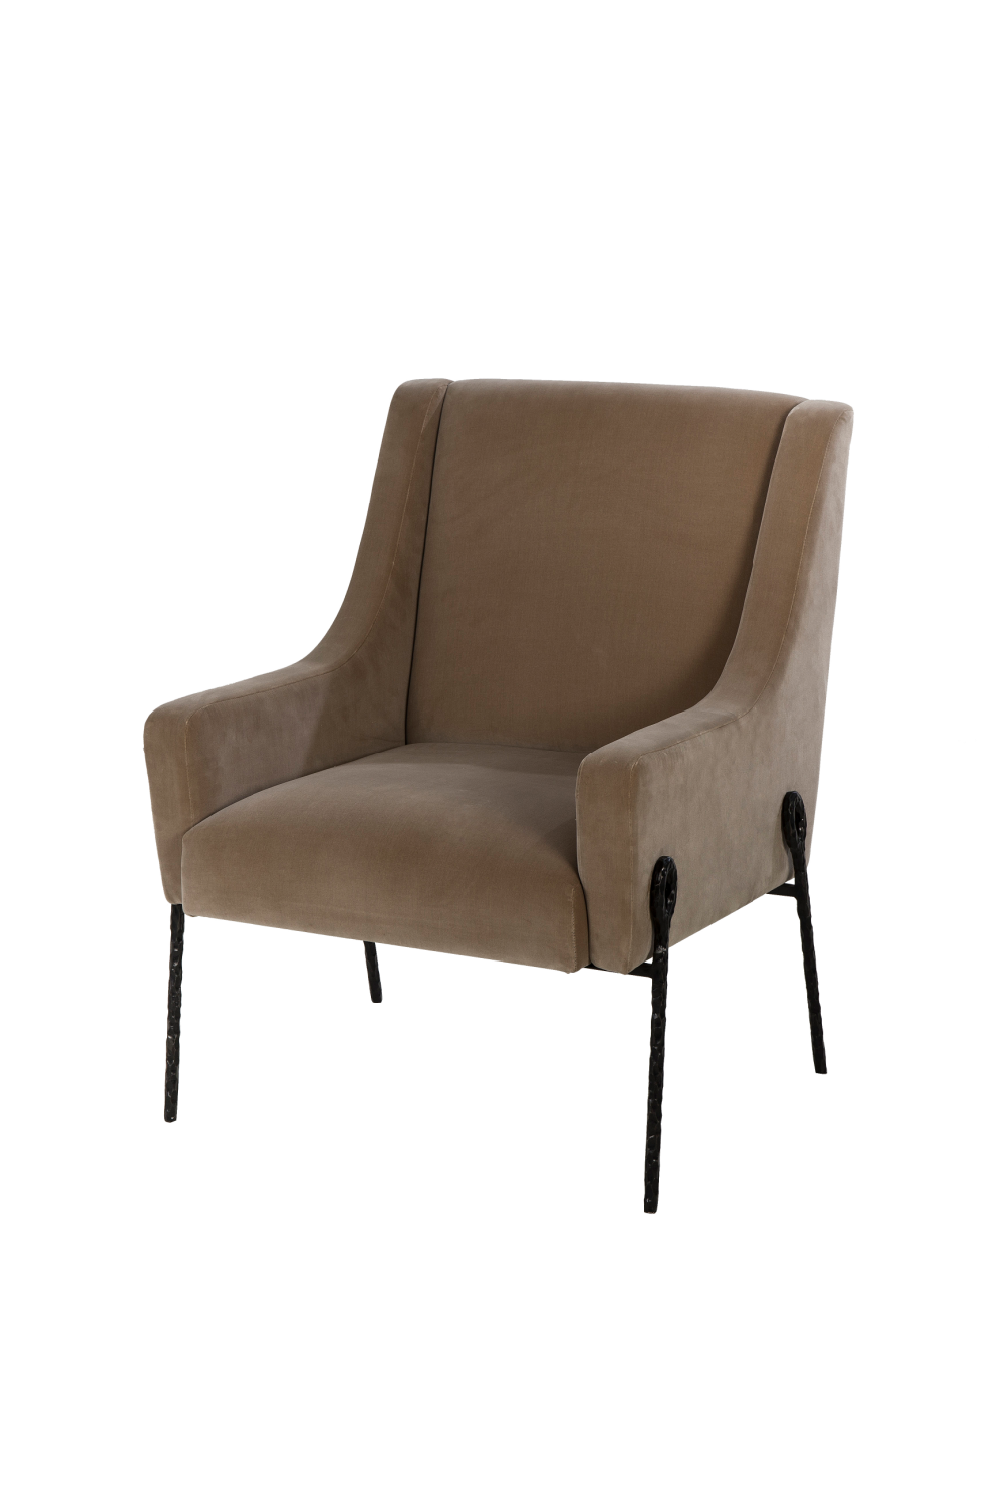 Brown Upholstered Occasional Chair | Andrew Martin Bailey | Oroa.com